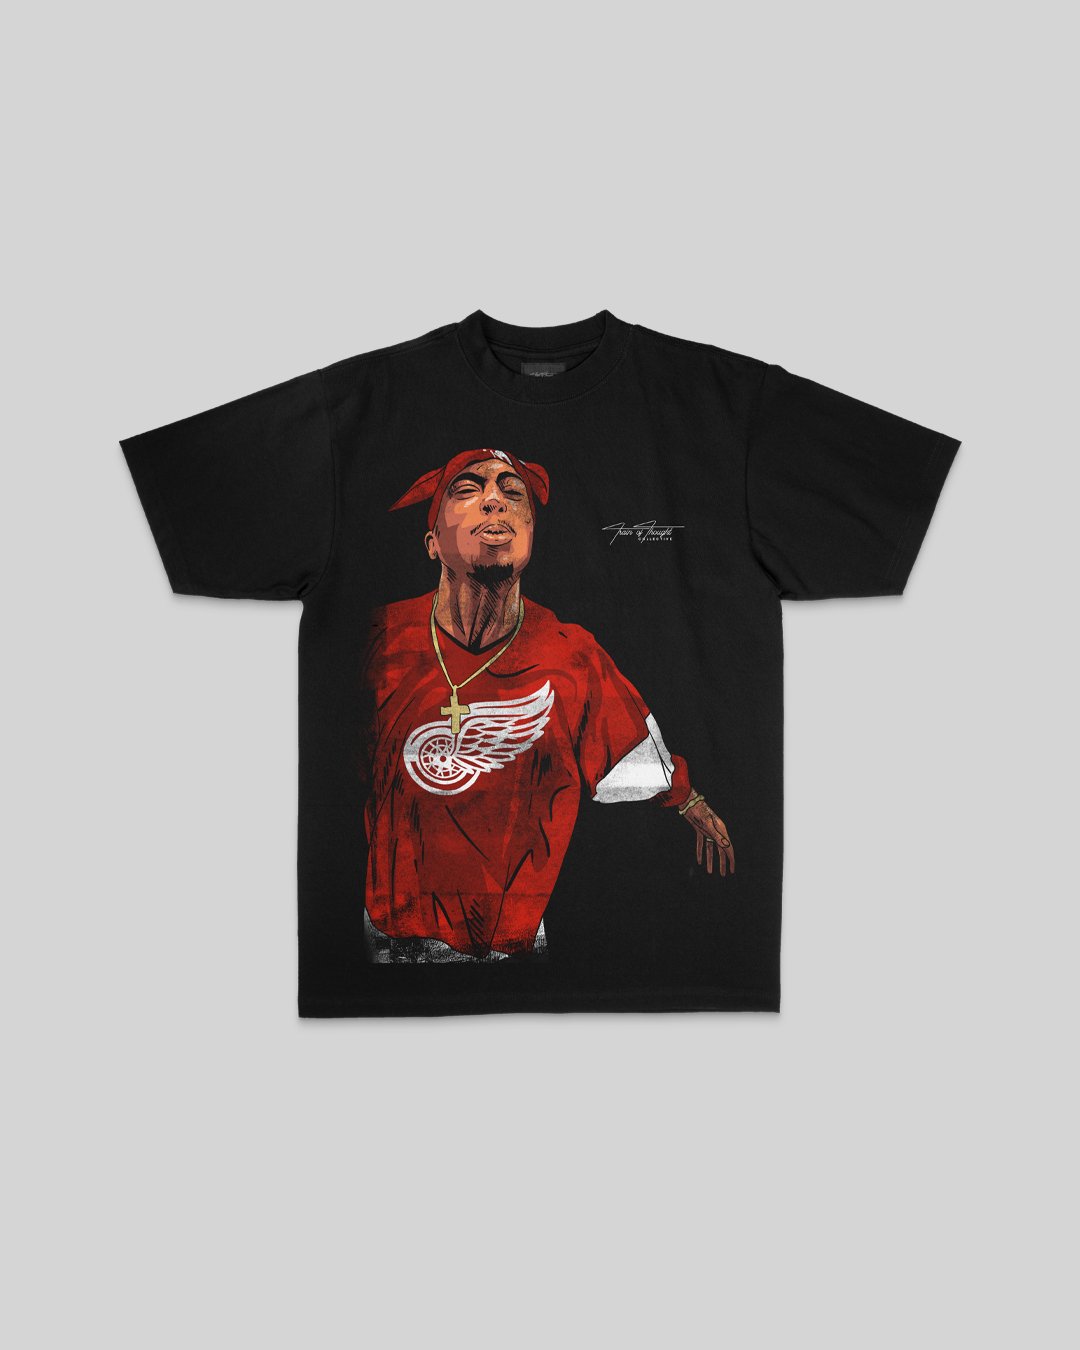 Pac Spit Big Face Black Shirt - trainofthoughtcollective